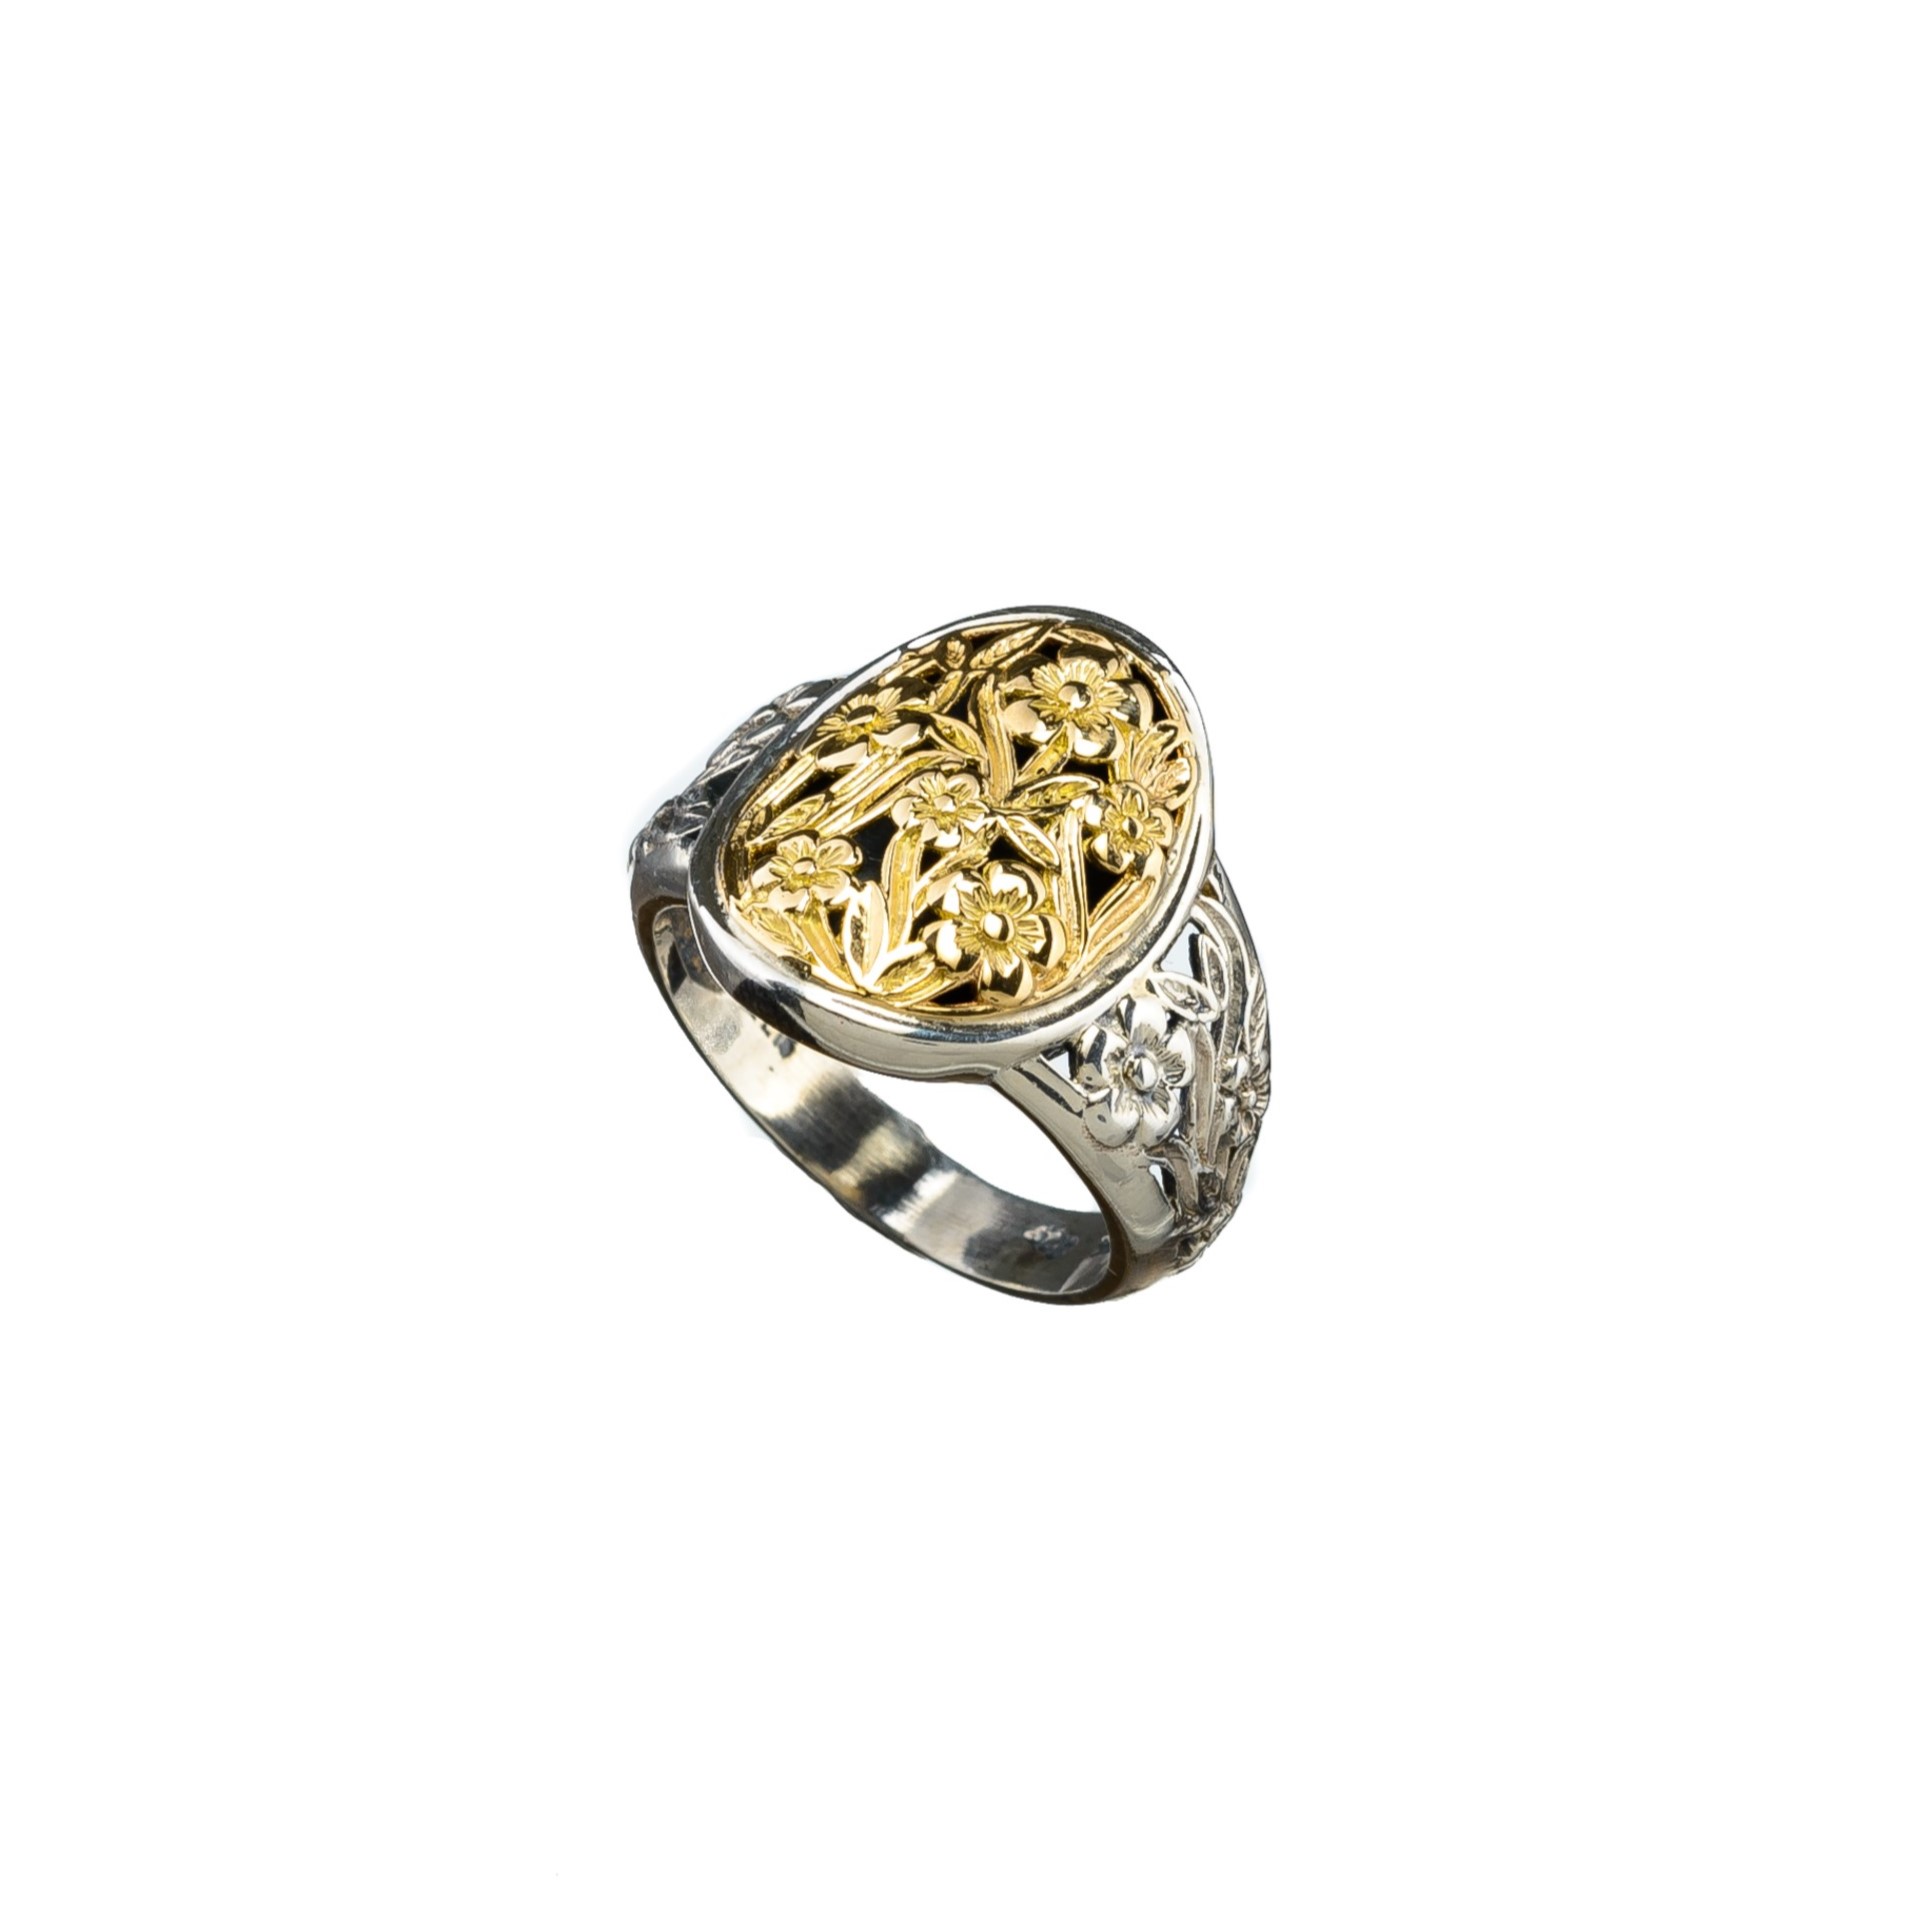 Harmony ring in 18K Gold and Sterling Silver